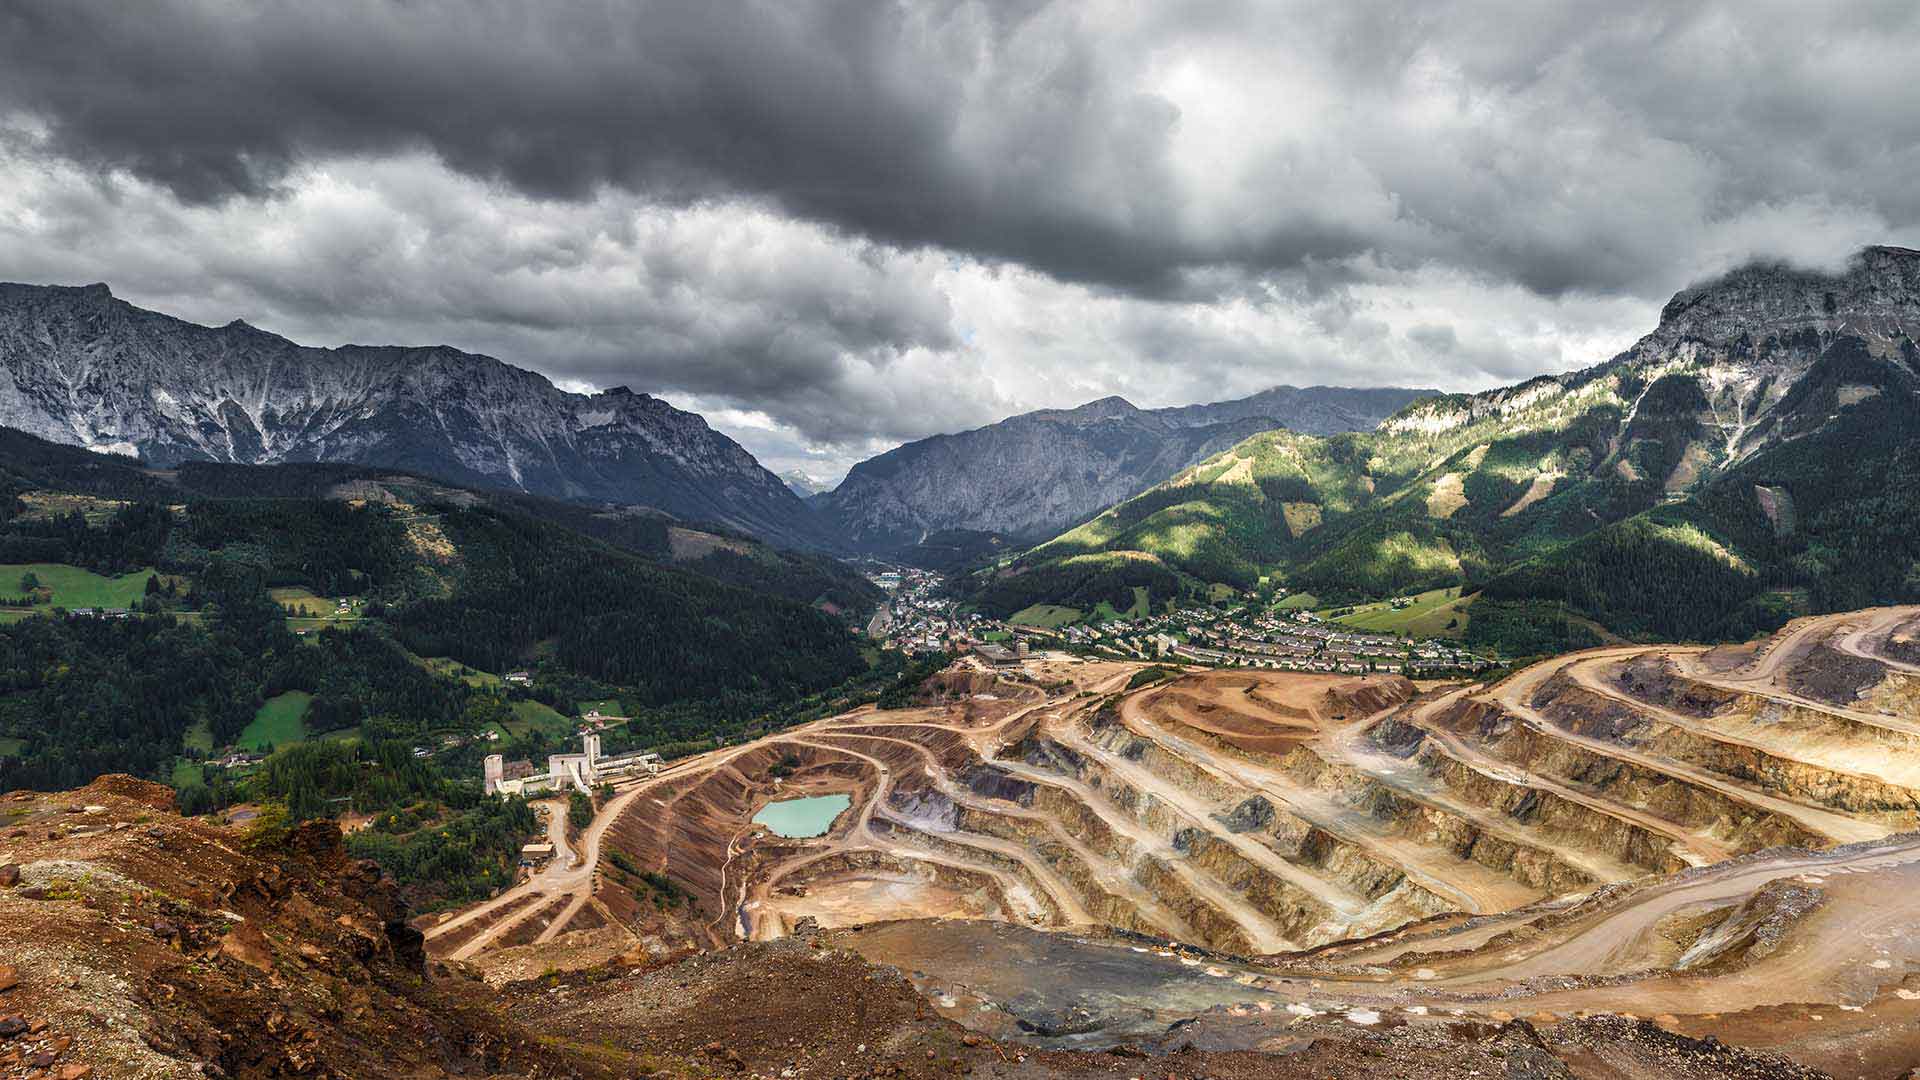 An open hillside mine with gray mountains in the background symbolizes nickel mining